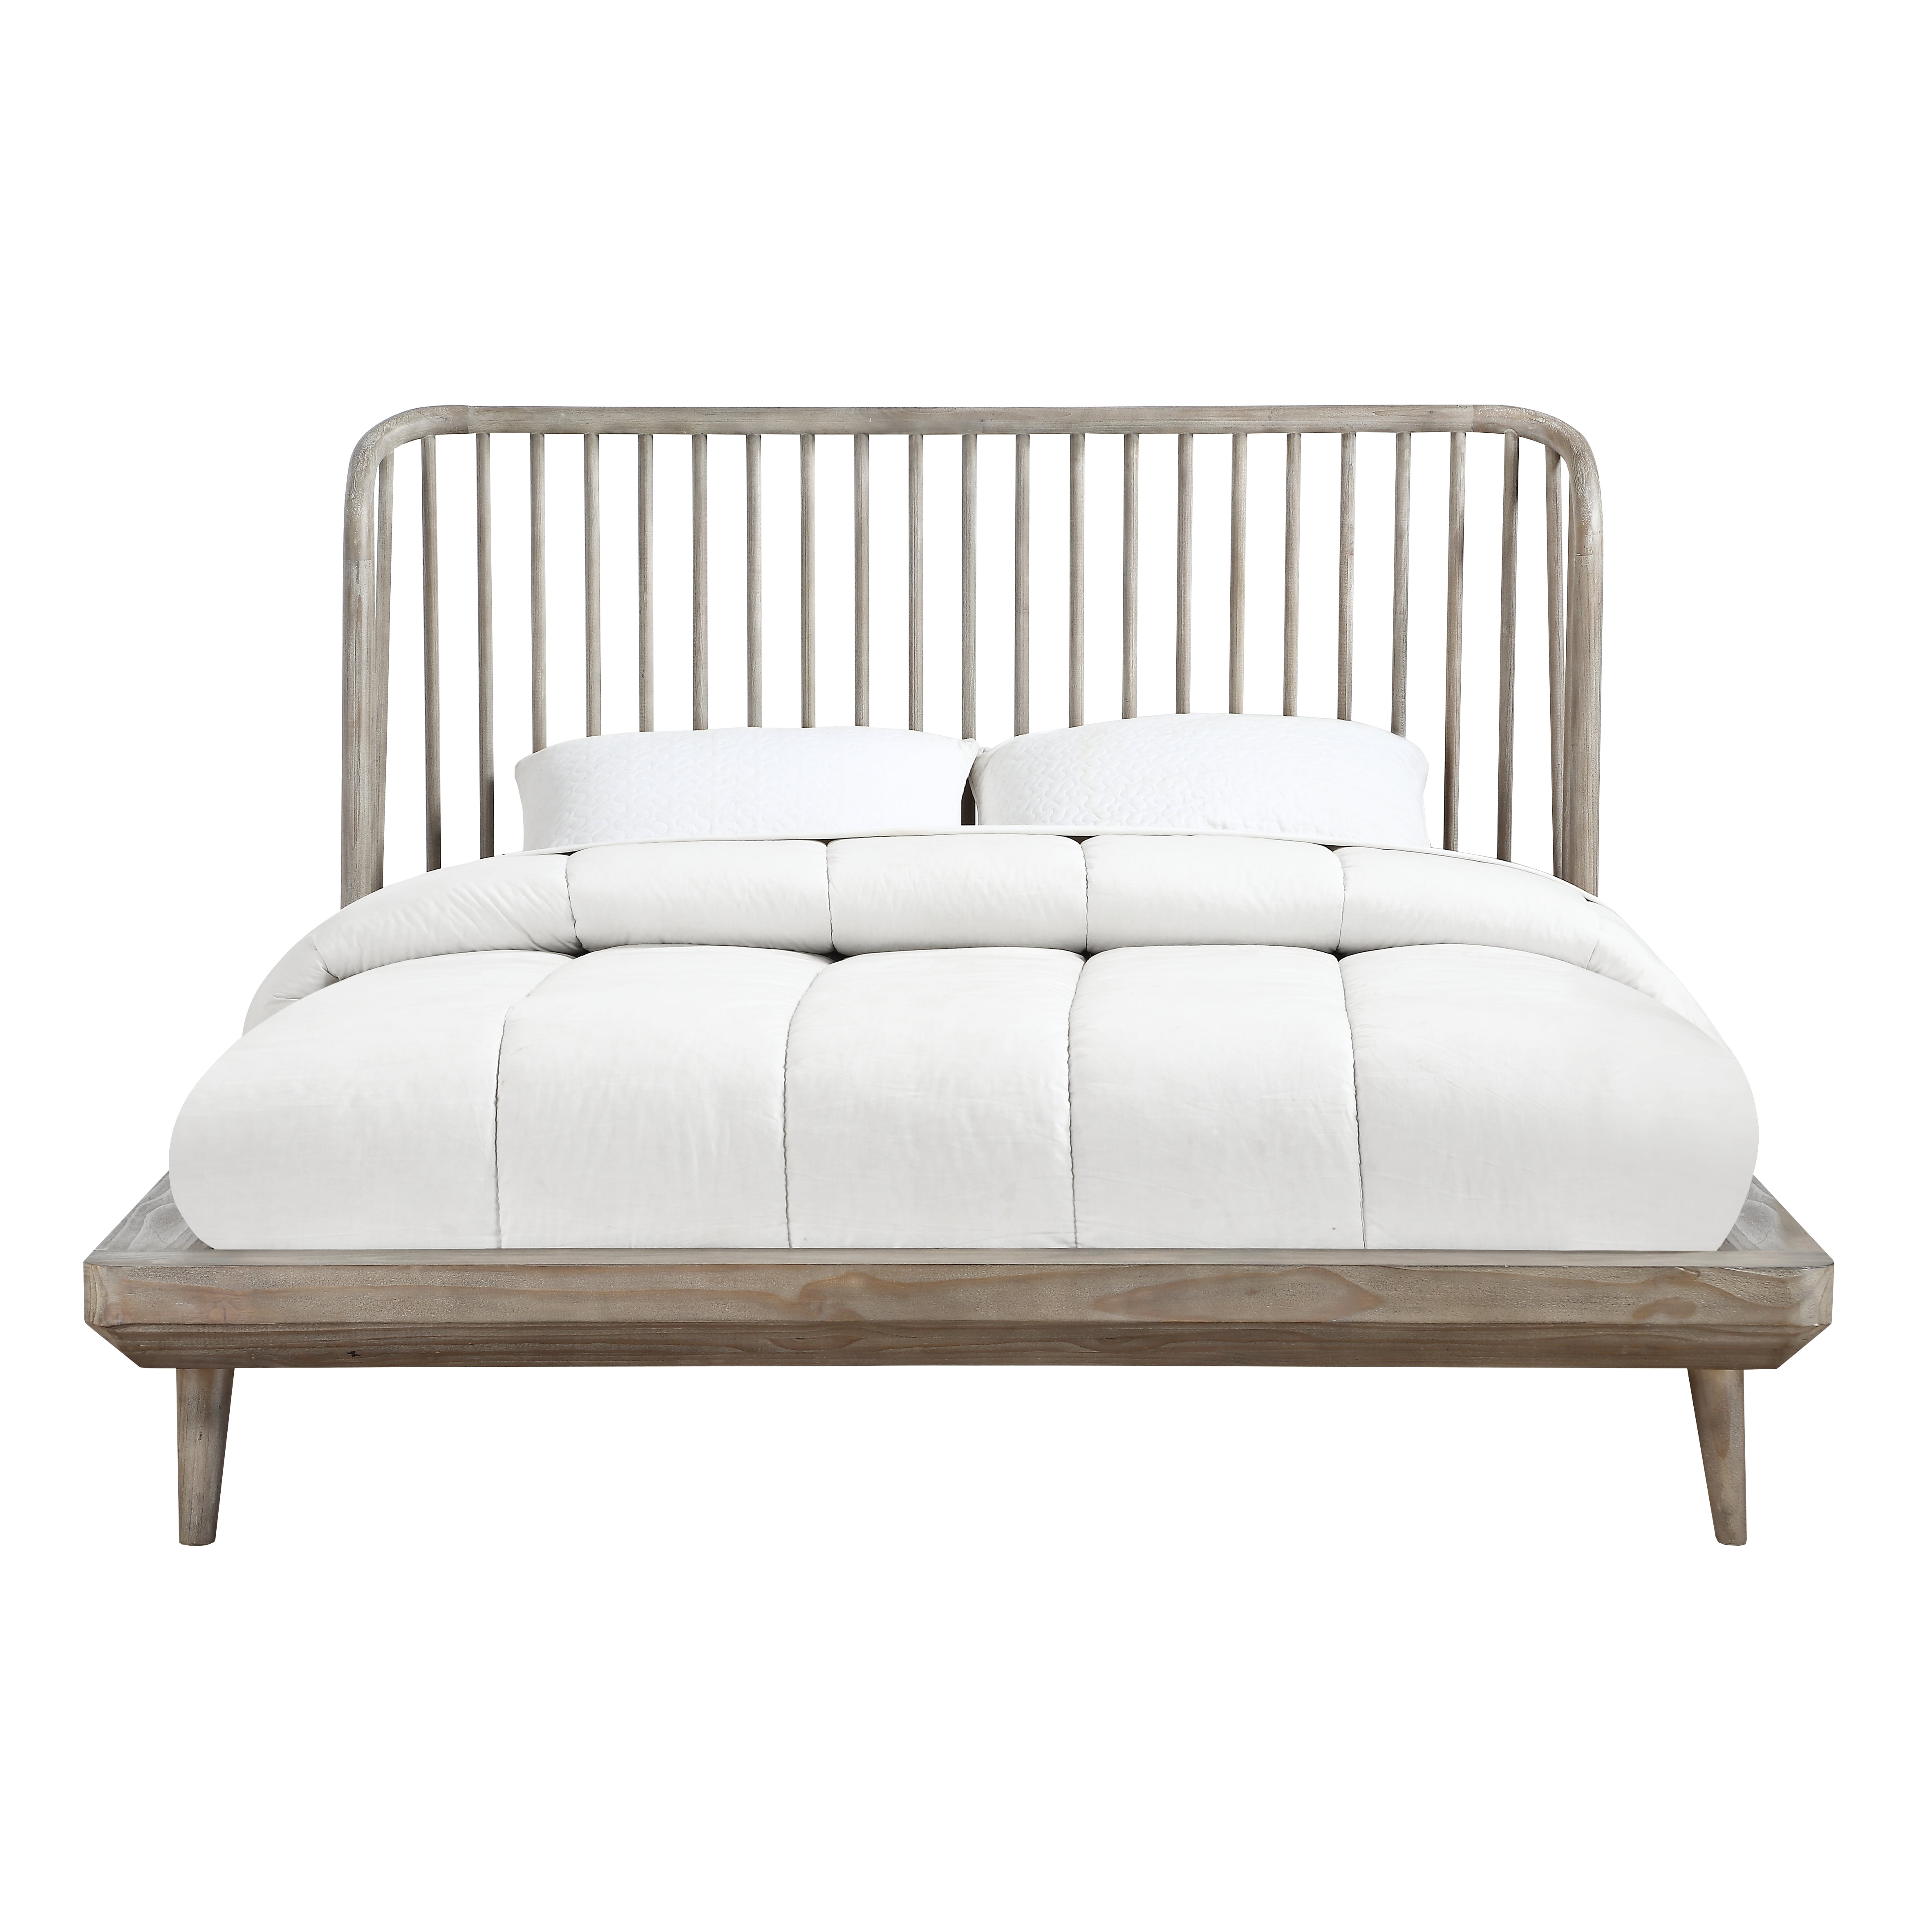 Modus Furniture Spindle Solid Wood, Wood Slats For Cal King Bed